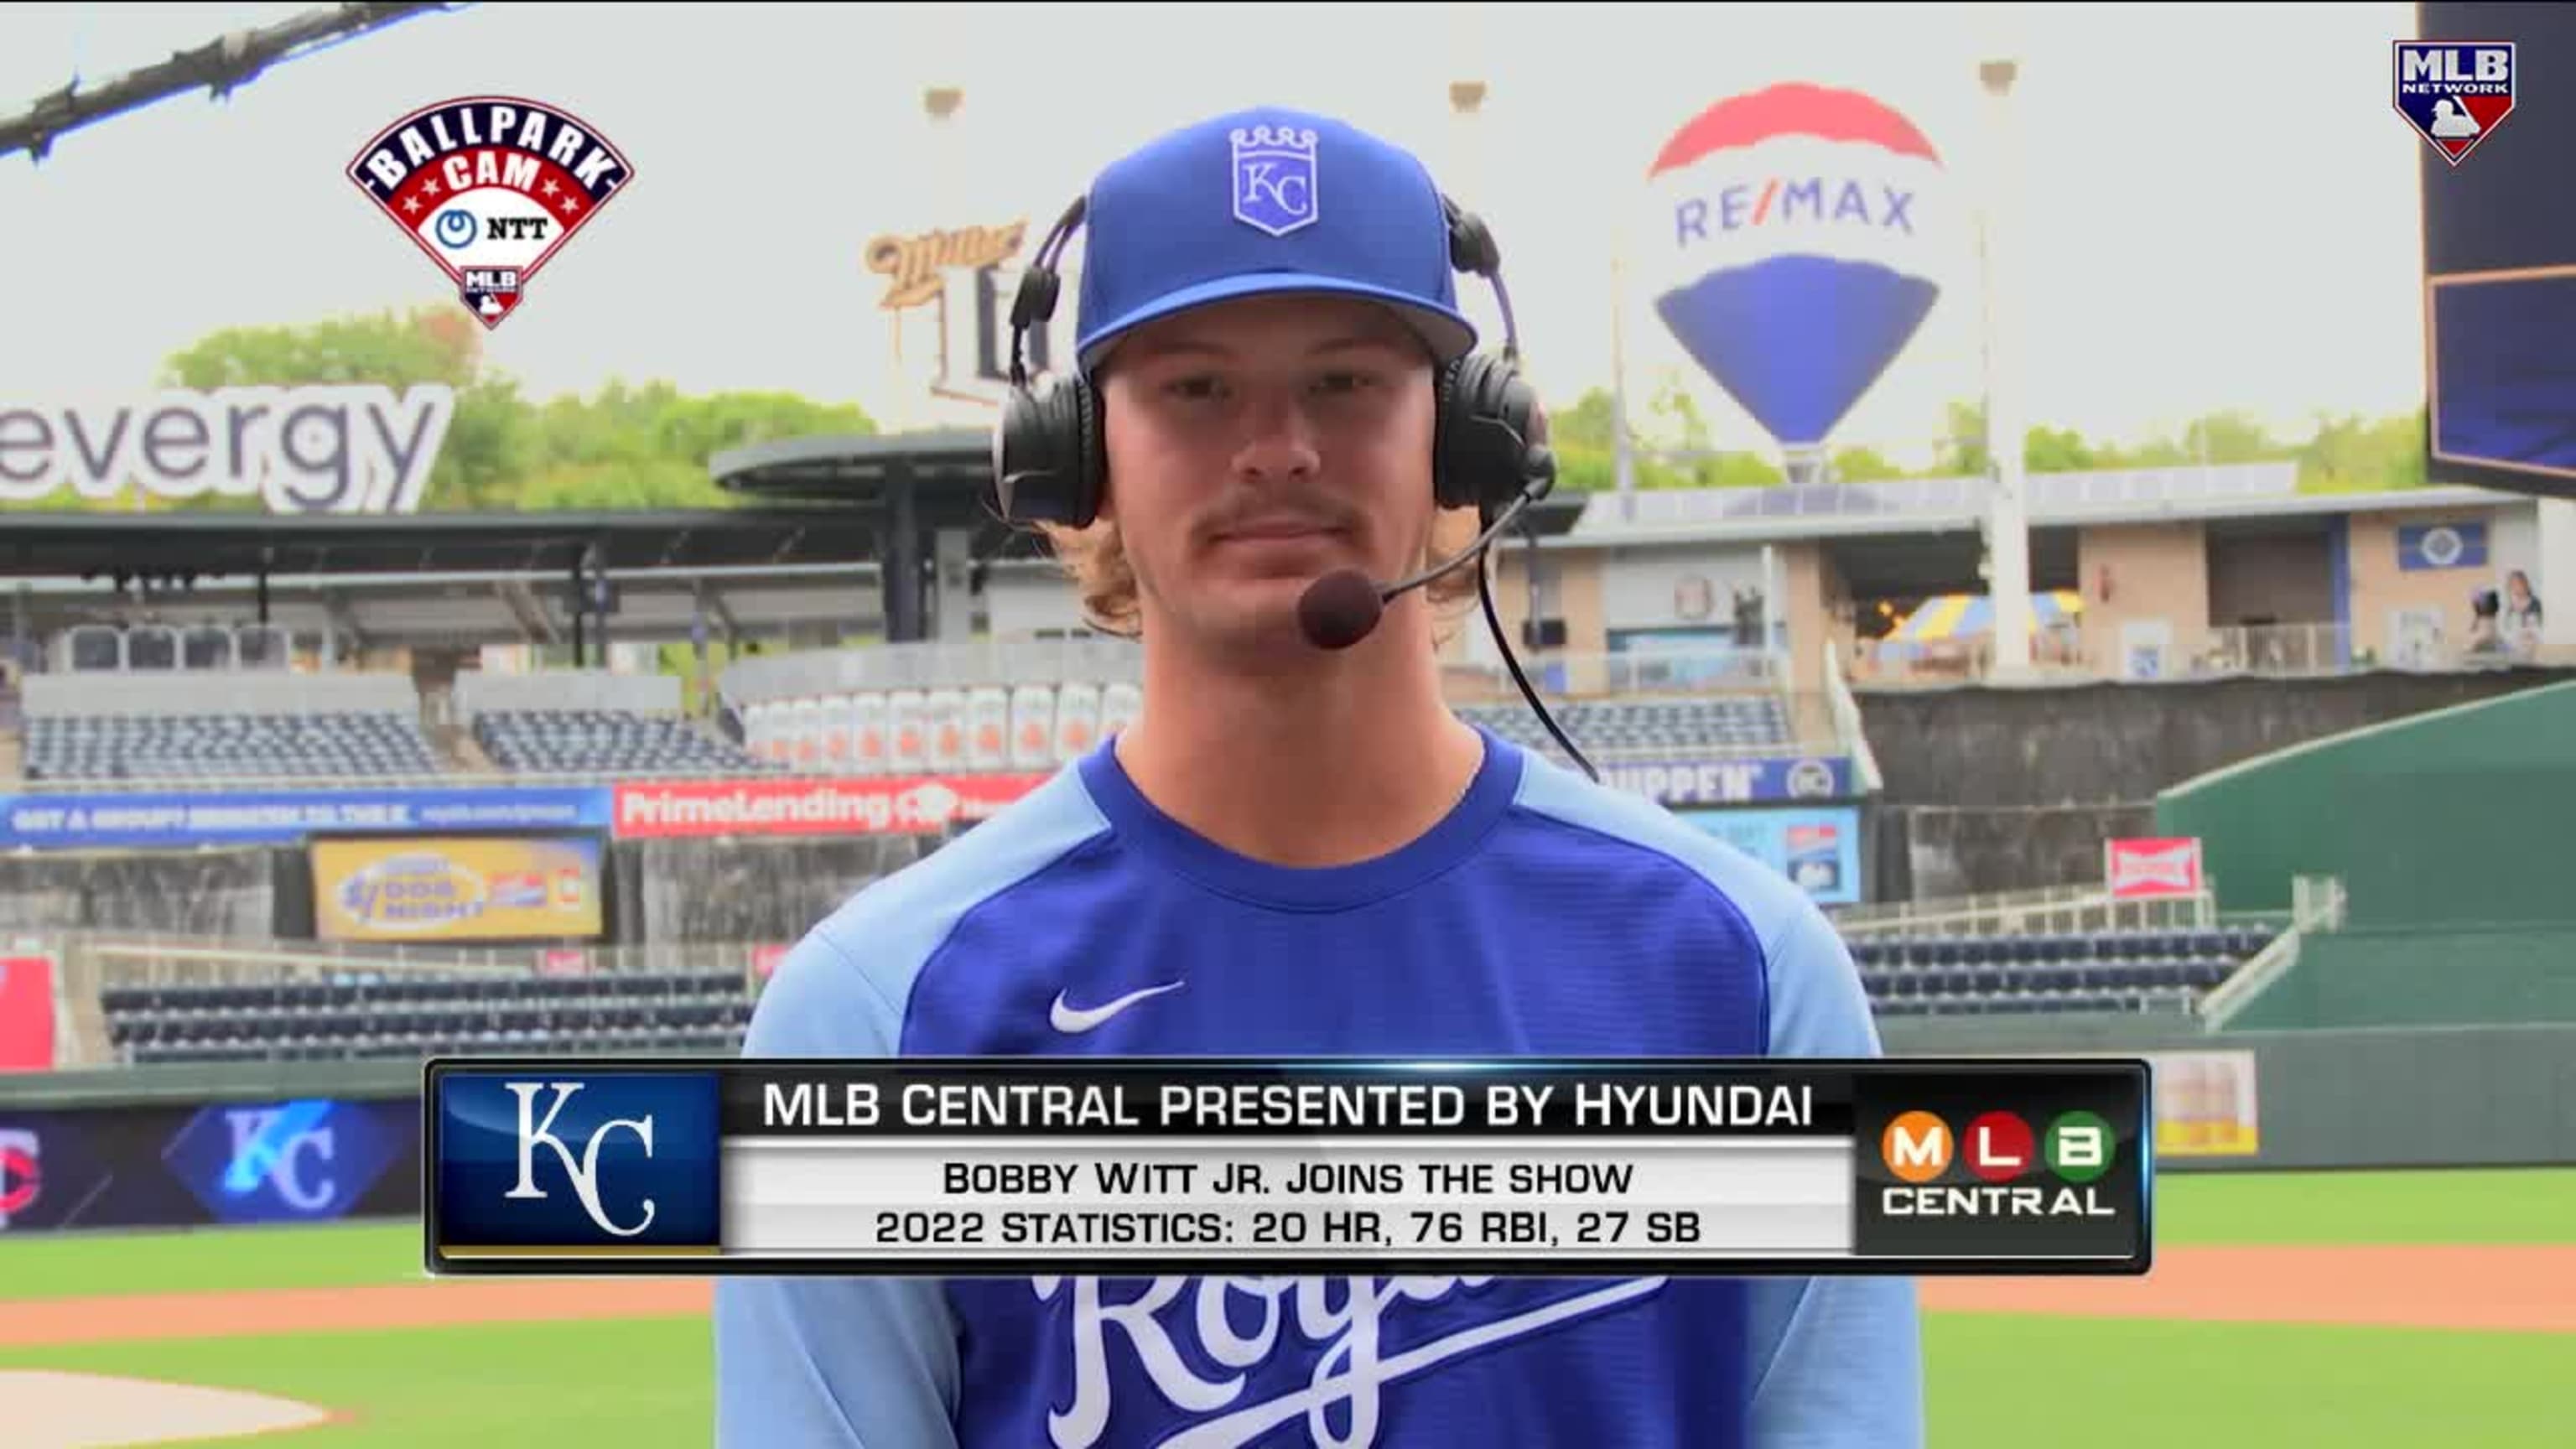 Witt's superb July leads to Royals Player of the Month honors